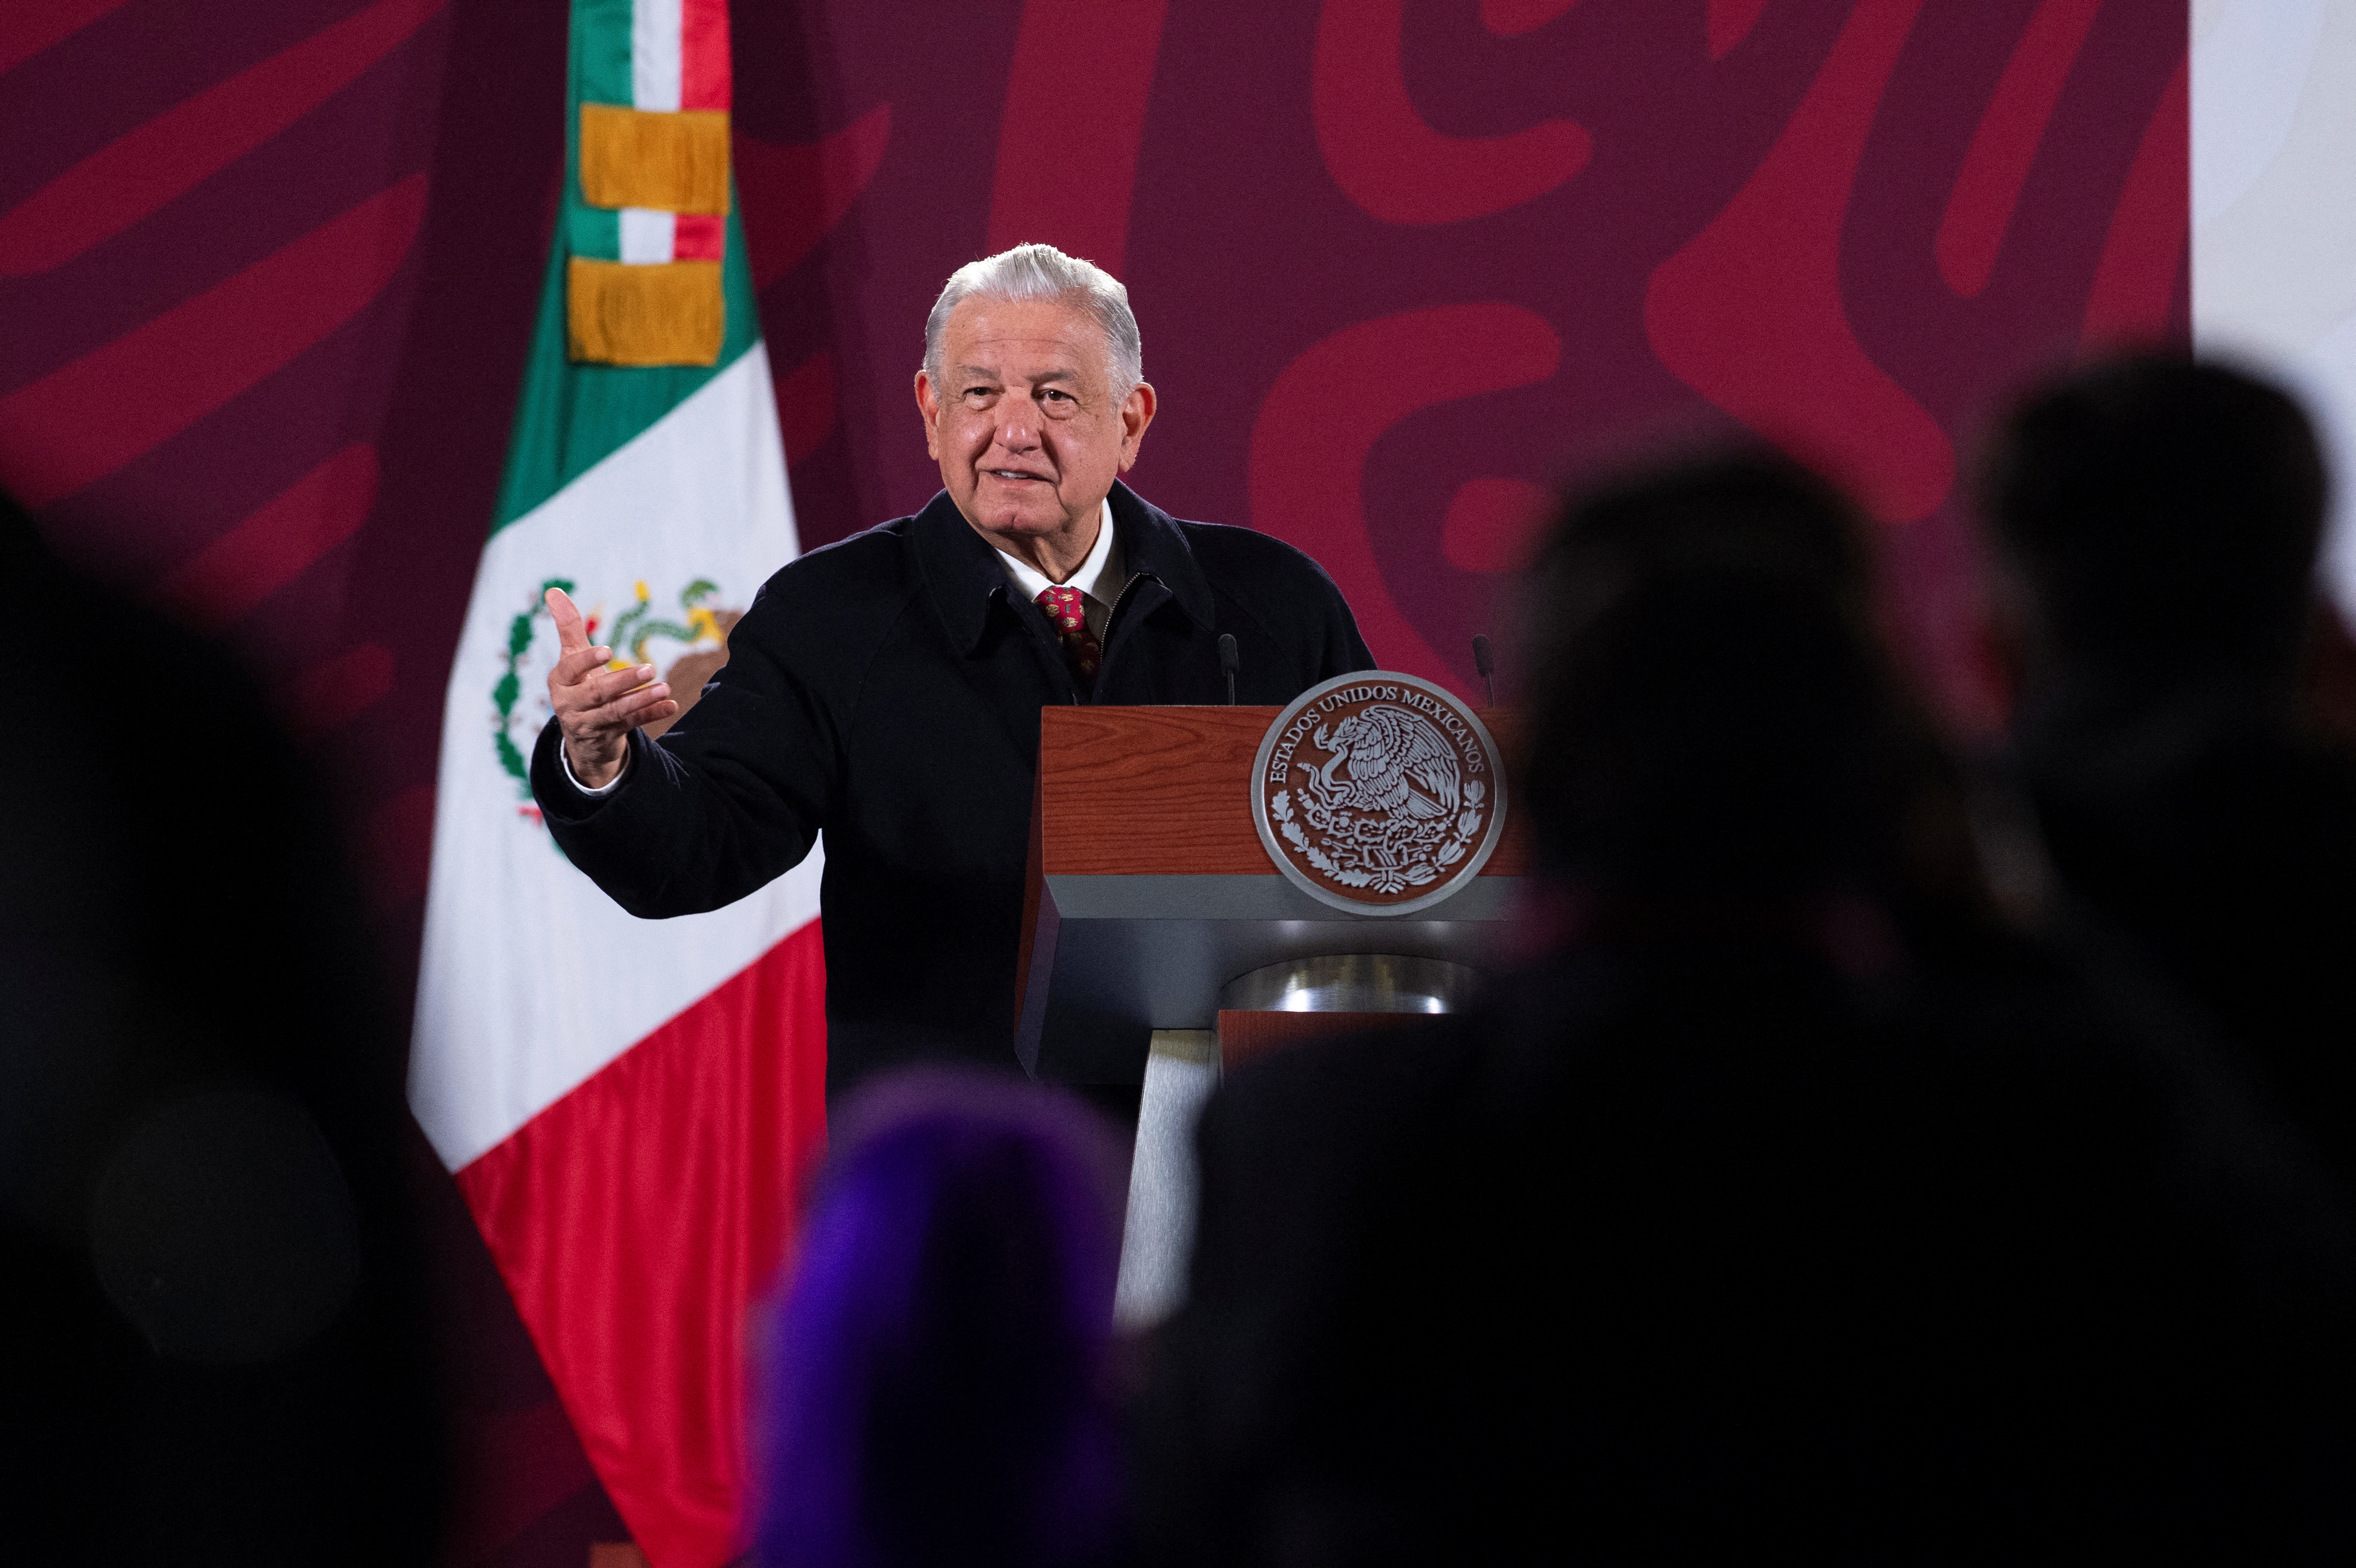 Mexico's President Andres Manuel Lopez Obrador speaks to the media during a news conference at the National Palace in Mexico City